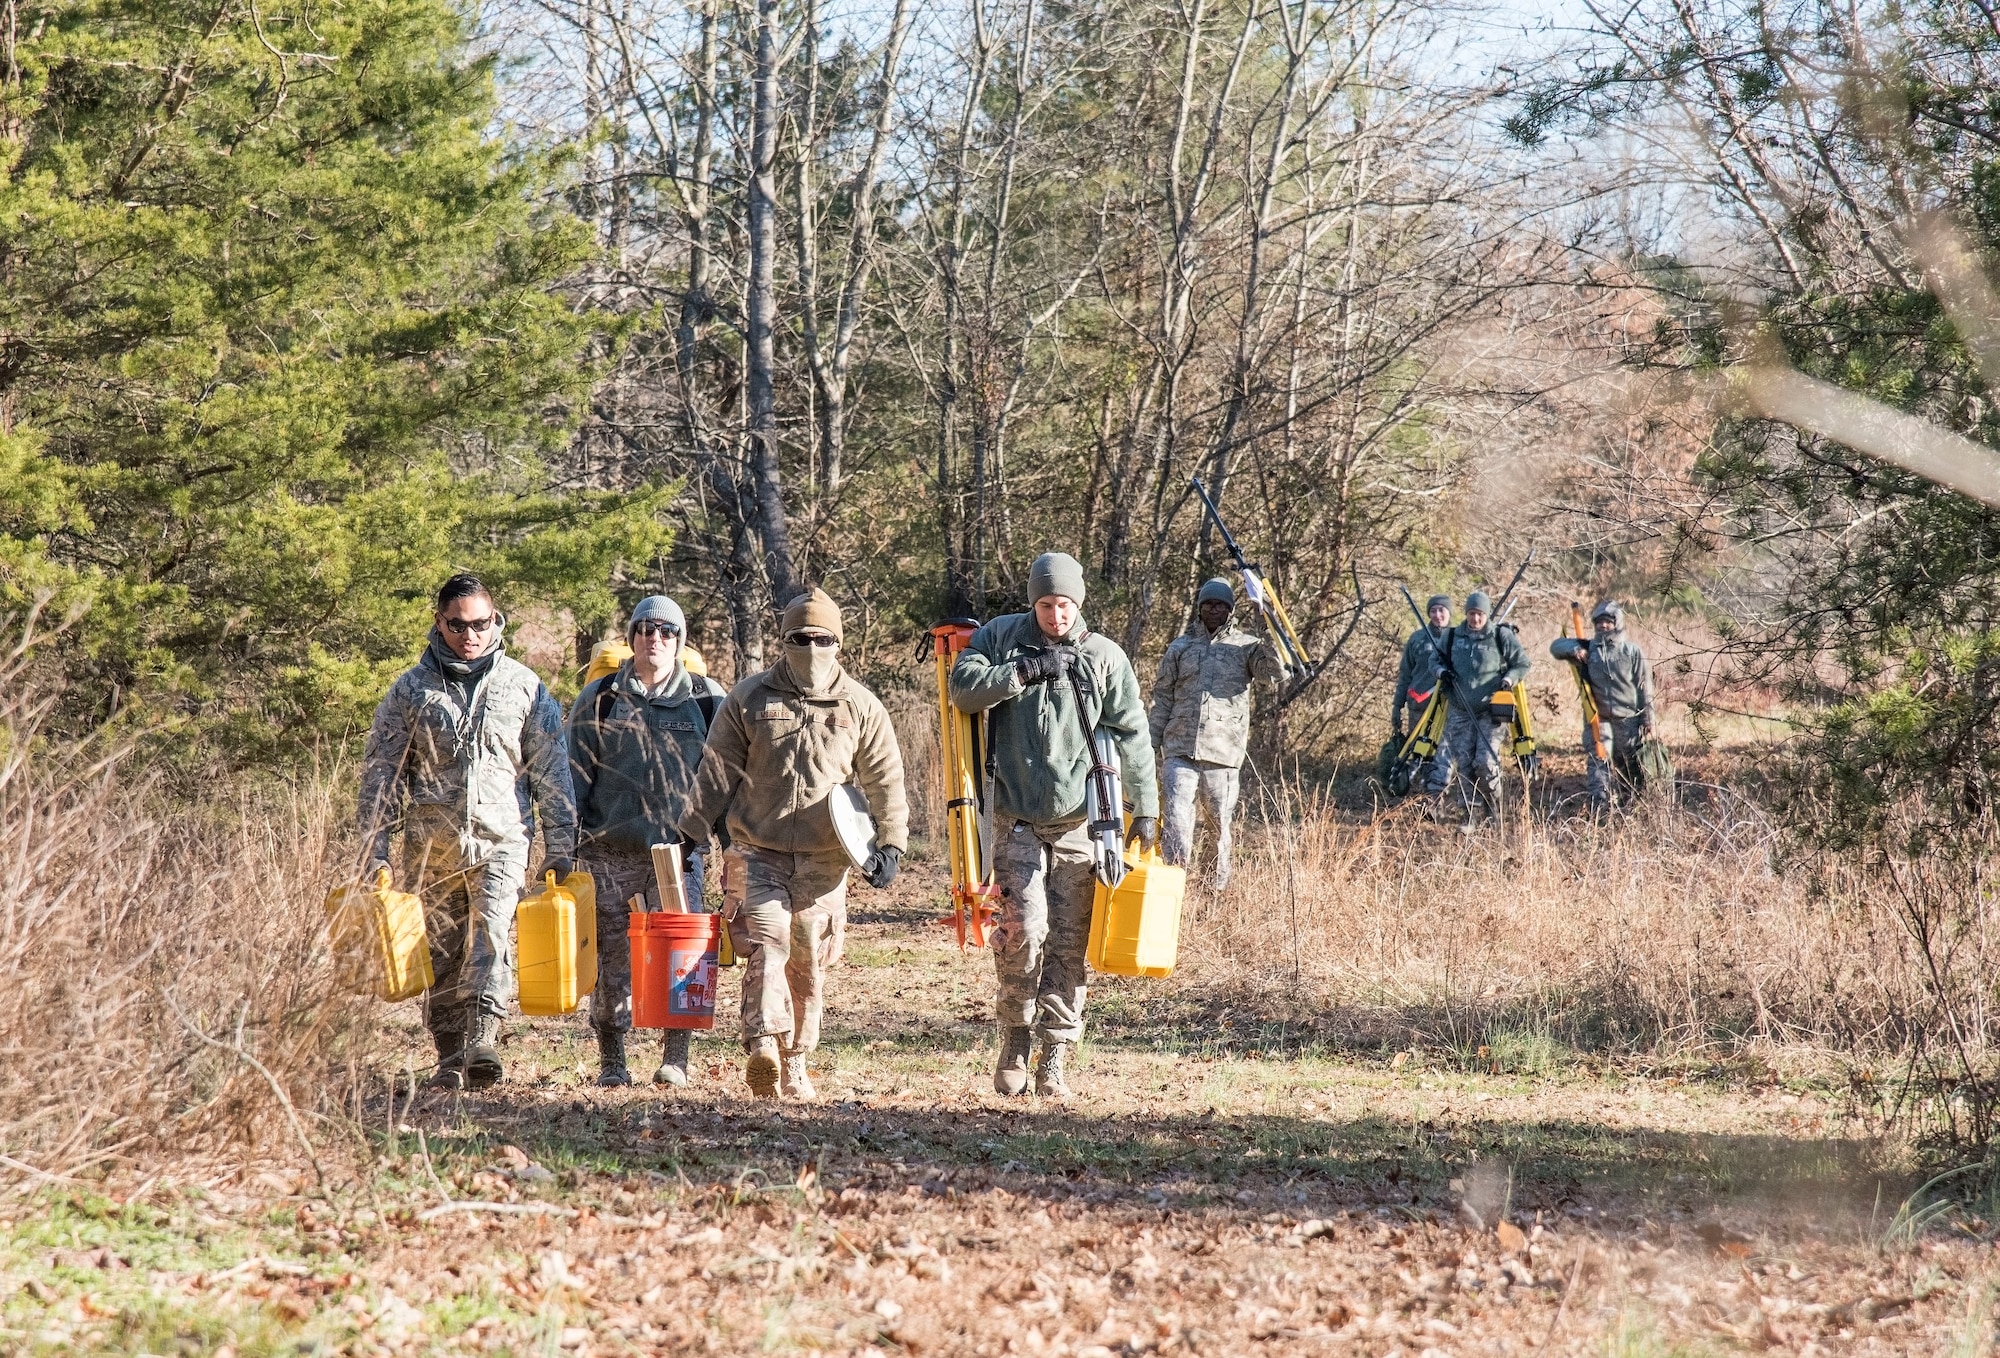 436th Civil Engineer Squadron engineering assistants carry necessary equipment to a debris field during an aircraft mishap survey exercise Dec. 18, 2018, near Killens Pond State Park, Kent County, Del. Survey team members located miscellaneous aircraft and aircrew items of a simulated T-38 Talon aircraft mishap and practiced plotting and documenting each of the items using GPS equipment and a digital camera. (U.S. Air Force photo by Roland Balik)